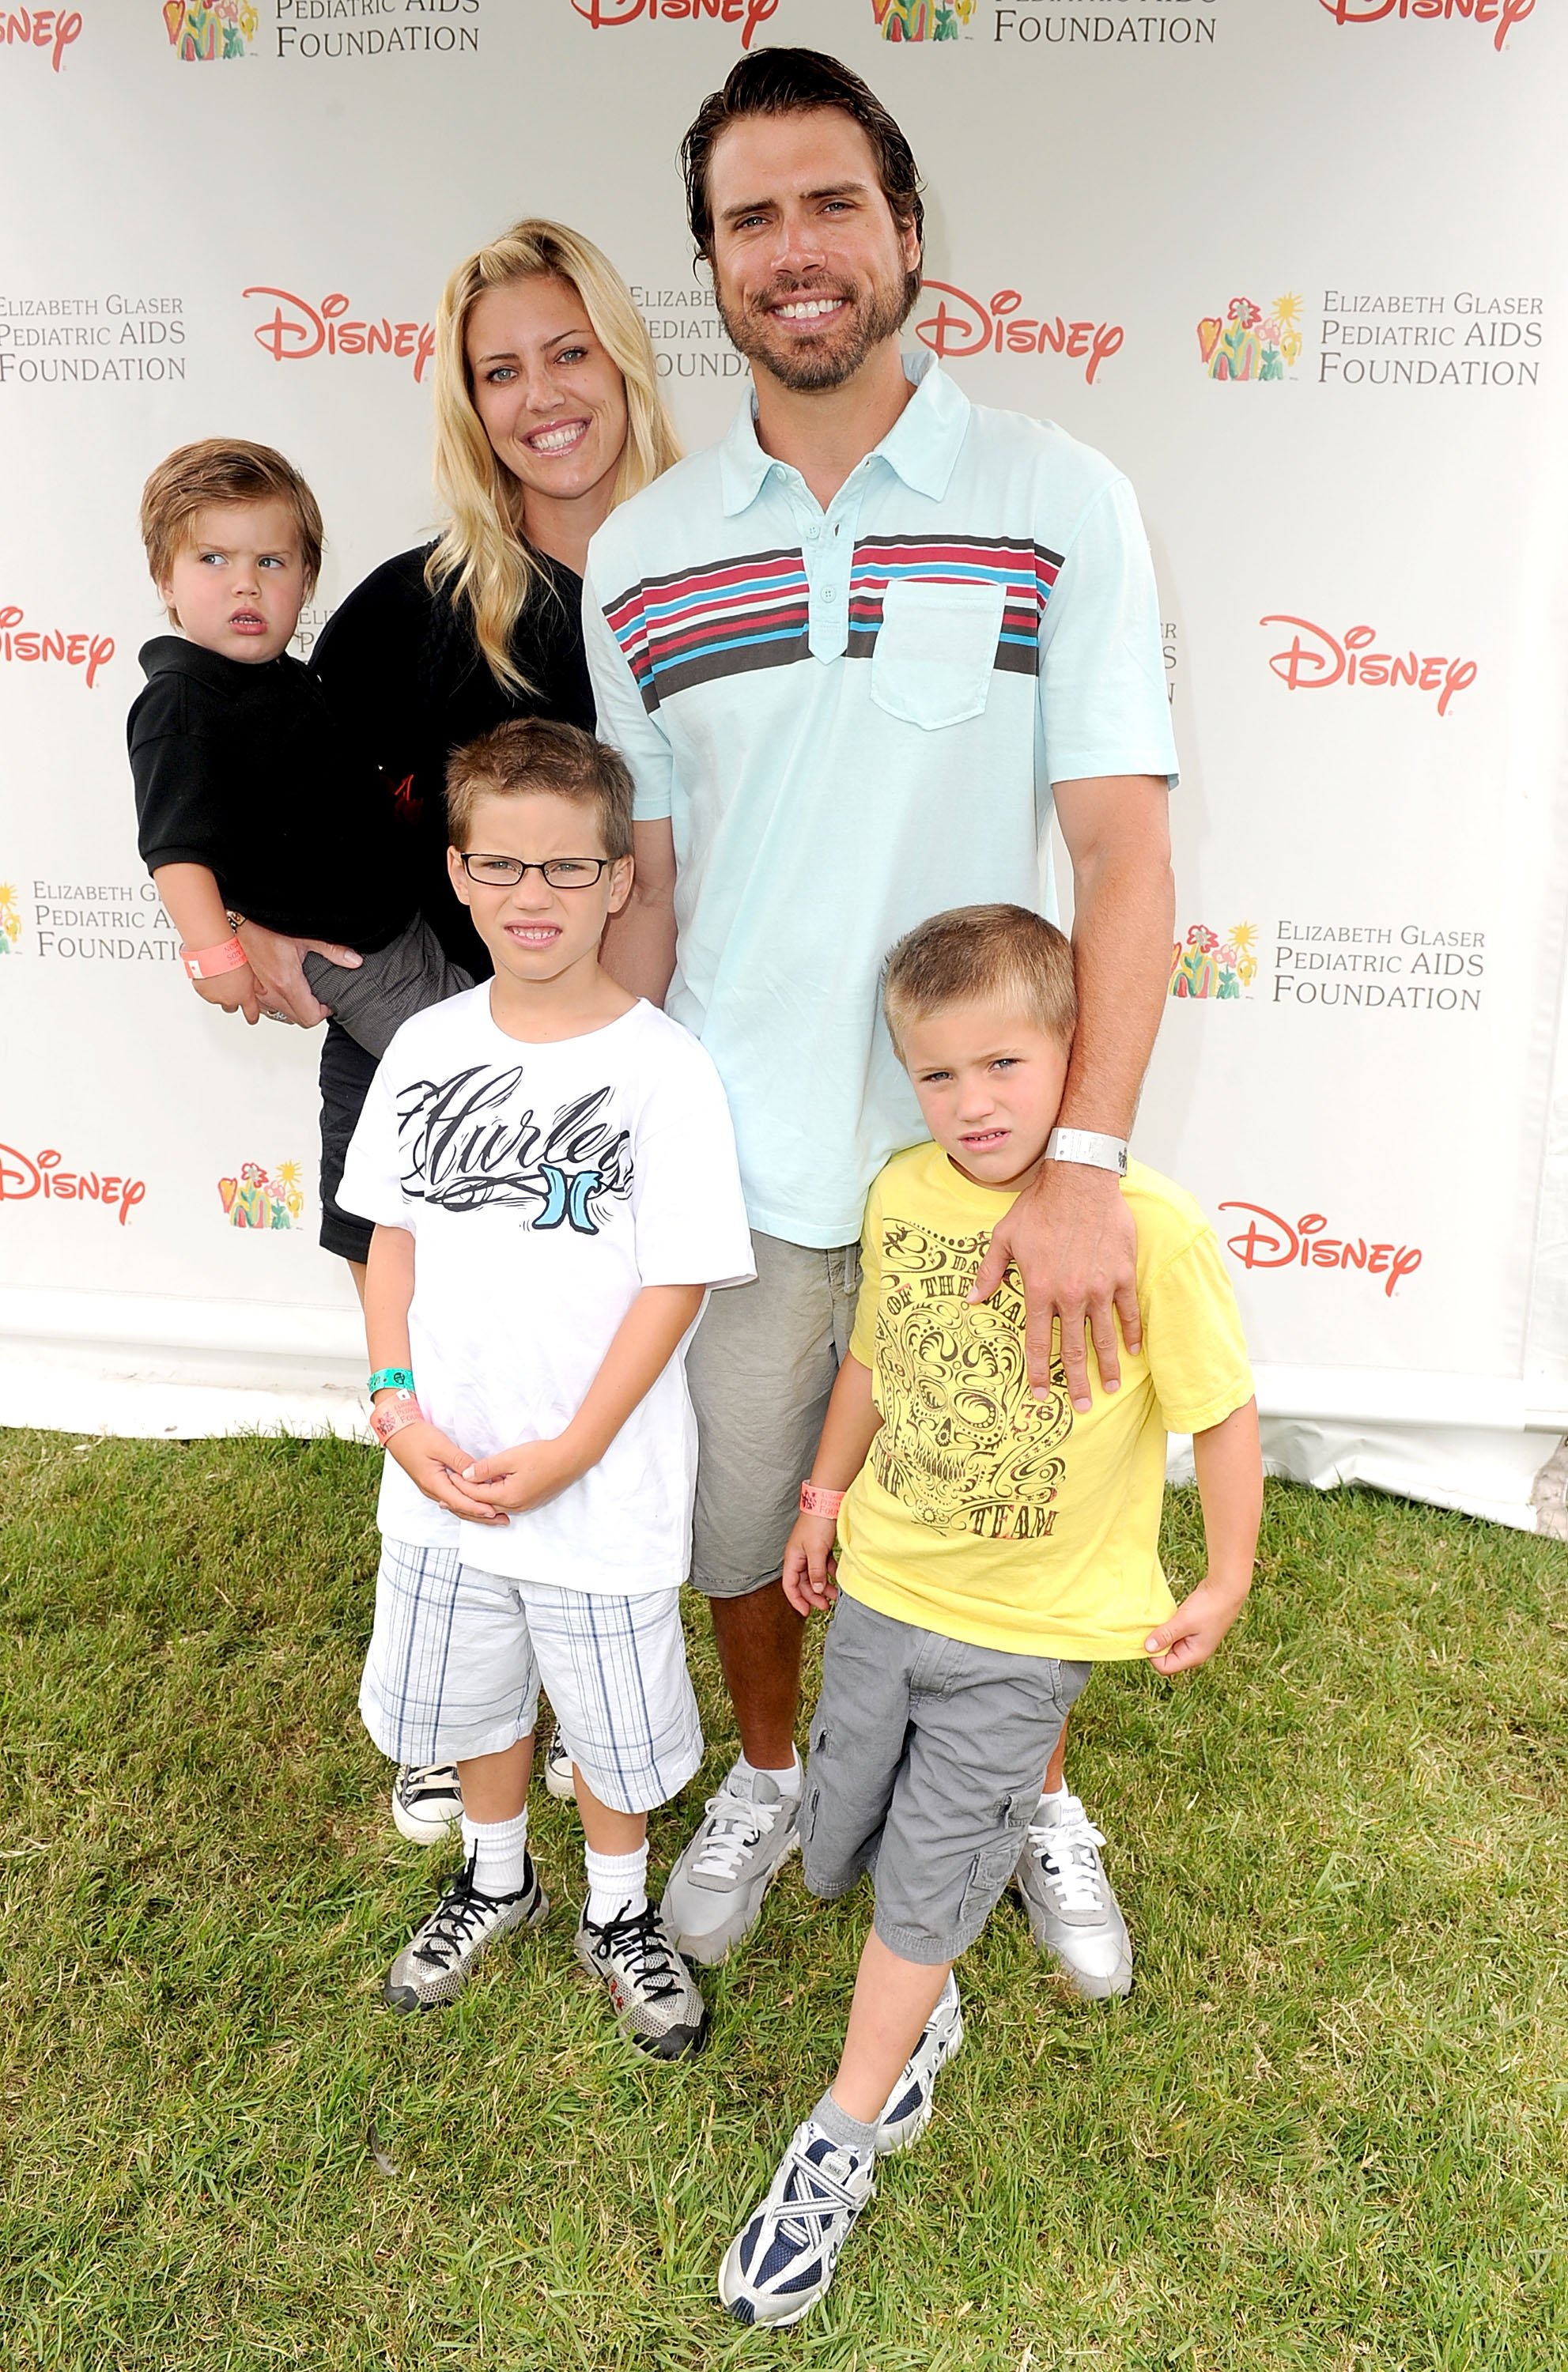 Joshua and Tobe Morrow  with their children at the 21st A Time For Heroes Celebrity Picnic sponsored by Disney to benefit the Elizabeth Glaser Pediatric Aids Foundation on June 13, 2010 in Los Angeles, California. | Photo: Getty Images 